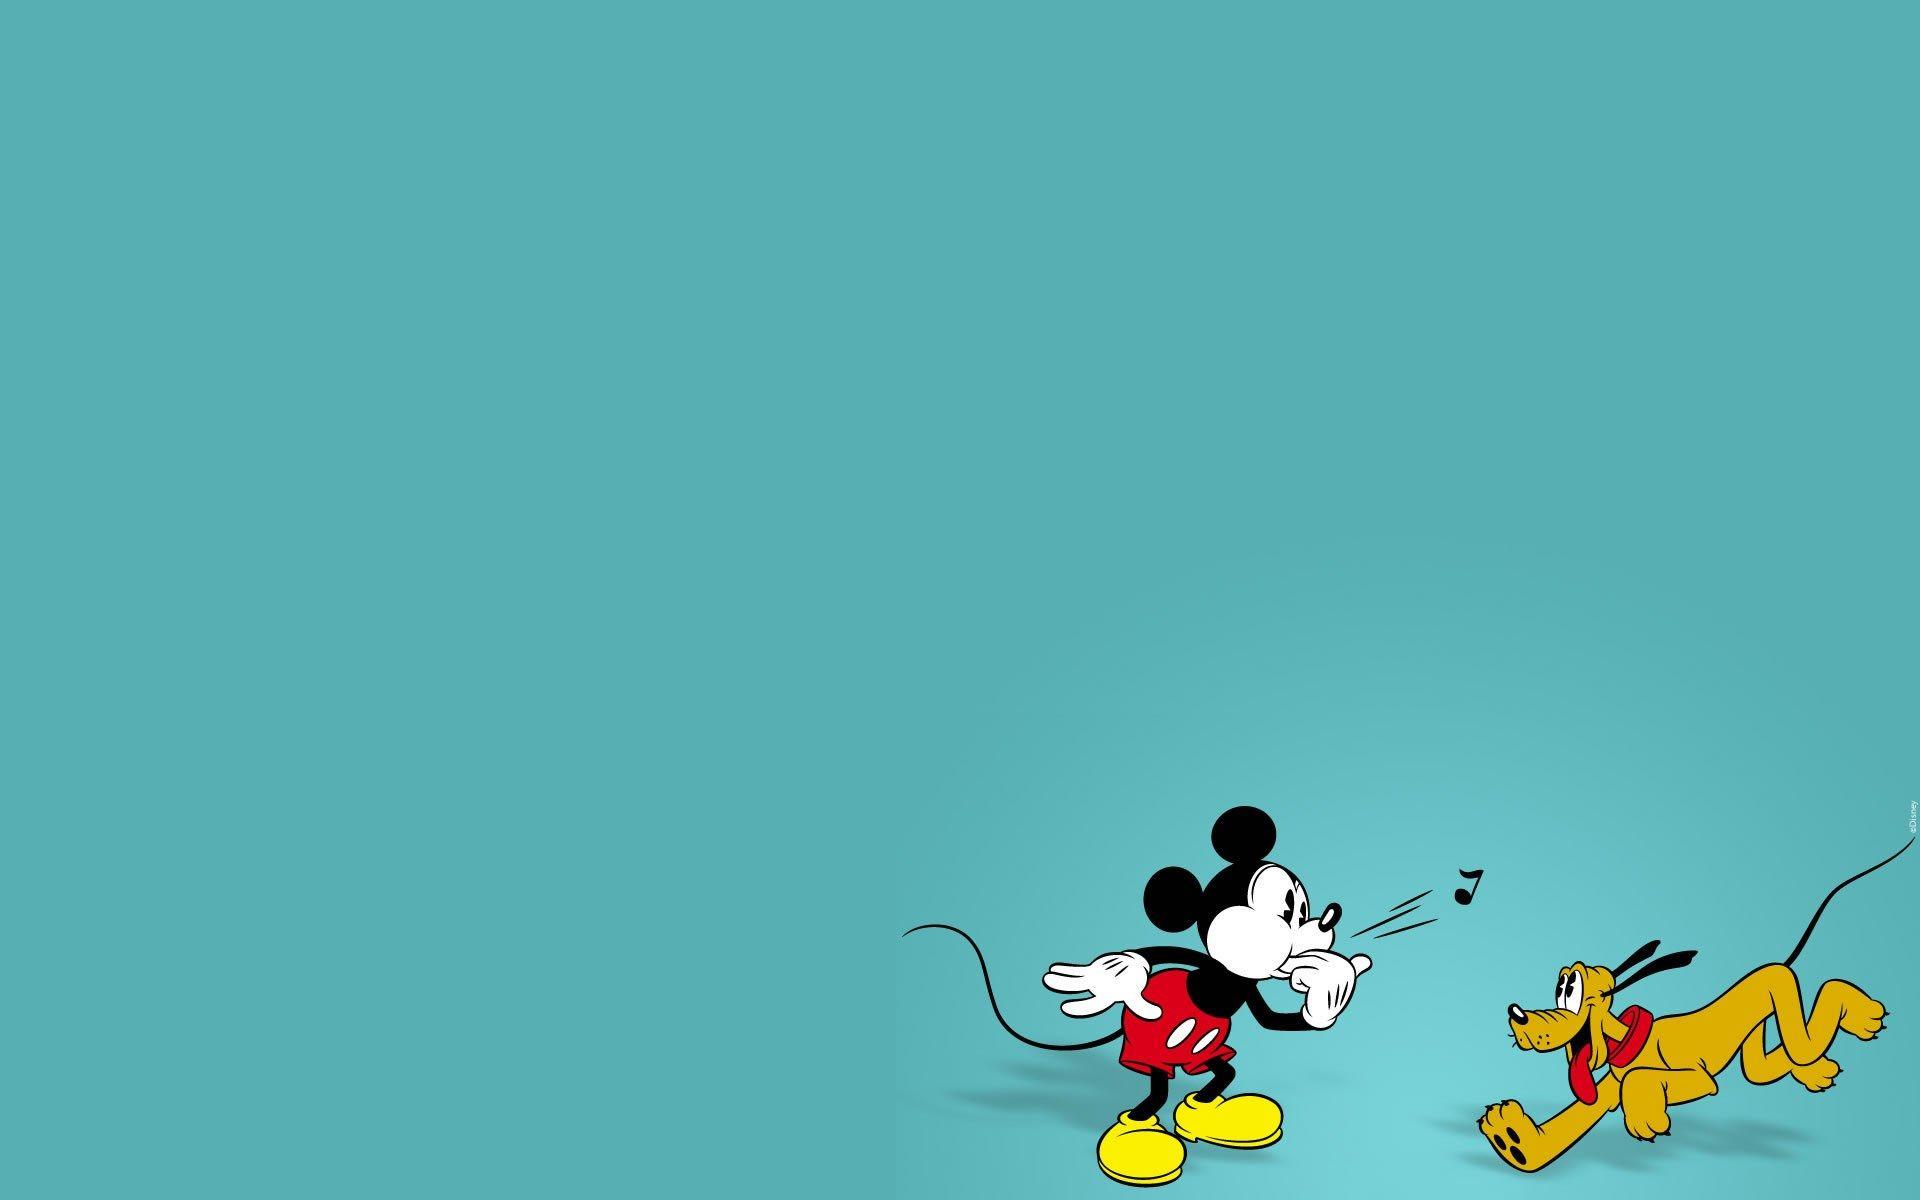 Mickey Mouse And Pluto Wallpaper. Foolhardi